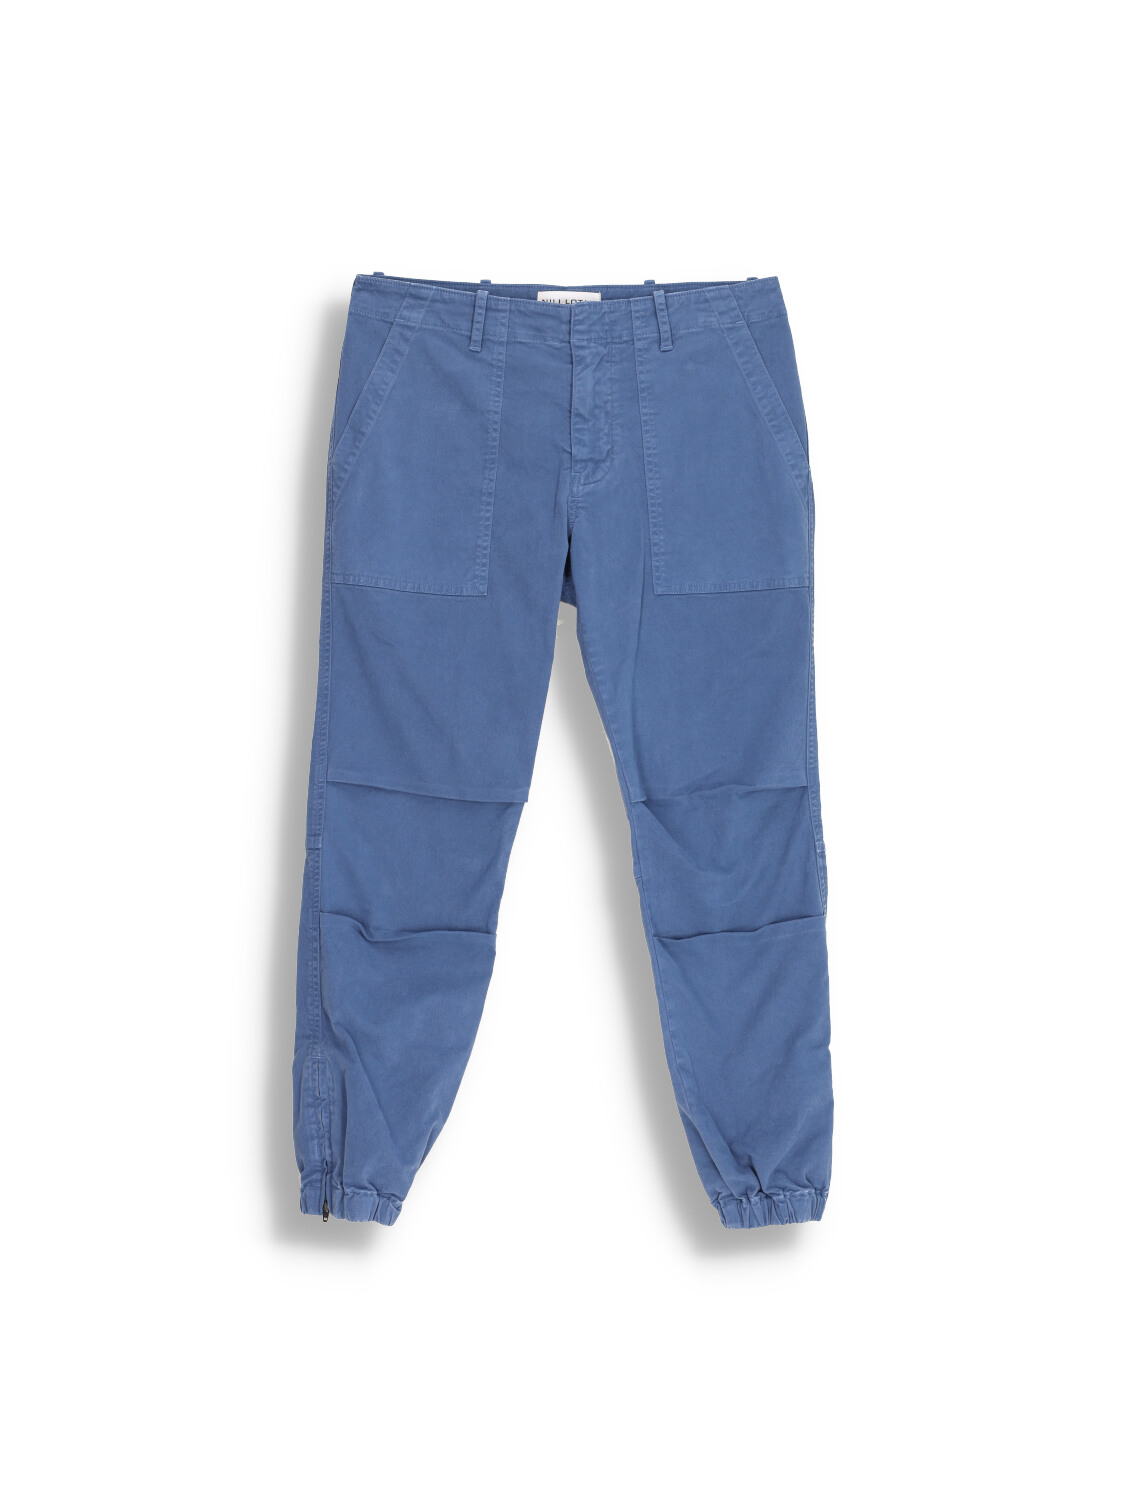 Cropped - ¾-trousers with large pockets made of cotton